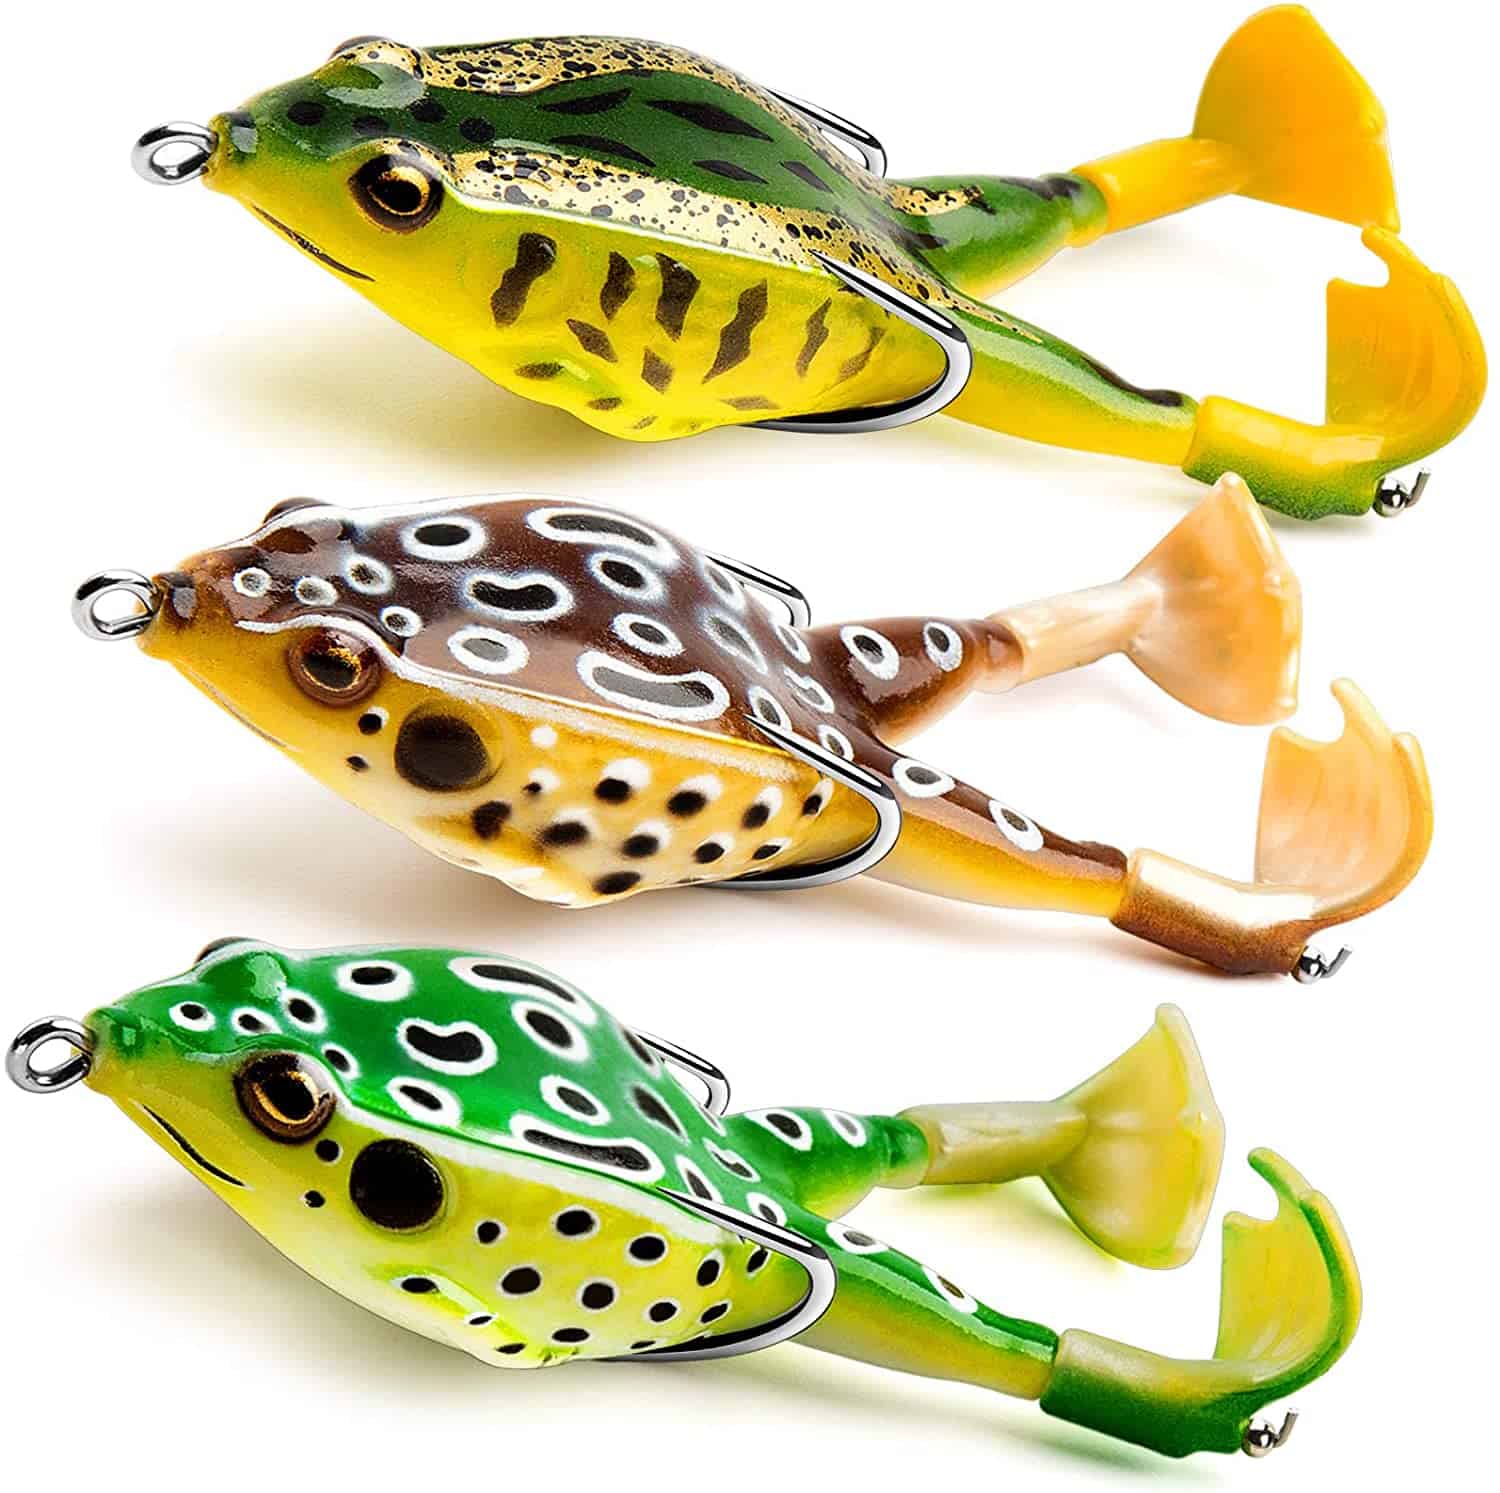 Topwater Frog Lure - Dissecting The Frog Game - Slamming Bass